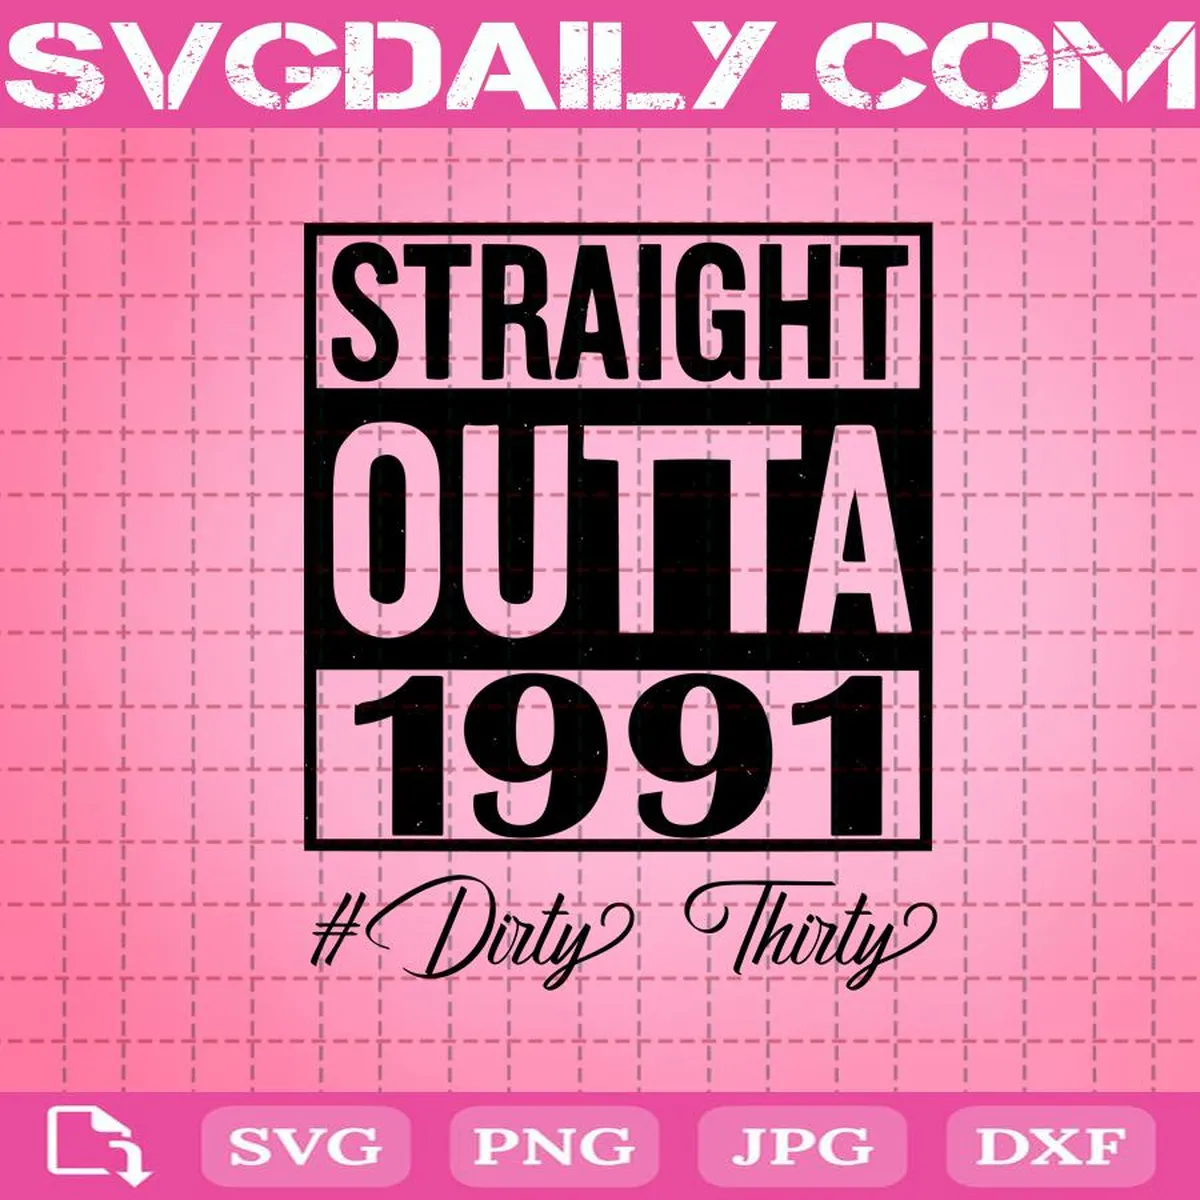 Straight Outta 1991 #DirtyThirty Svg, Straight Outta 1991 Svg, Straight Outta Svg, Straight Outta Birthday Svg, Instant Download